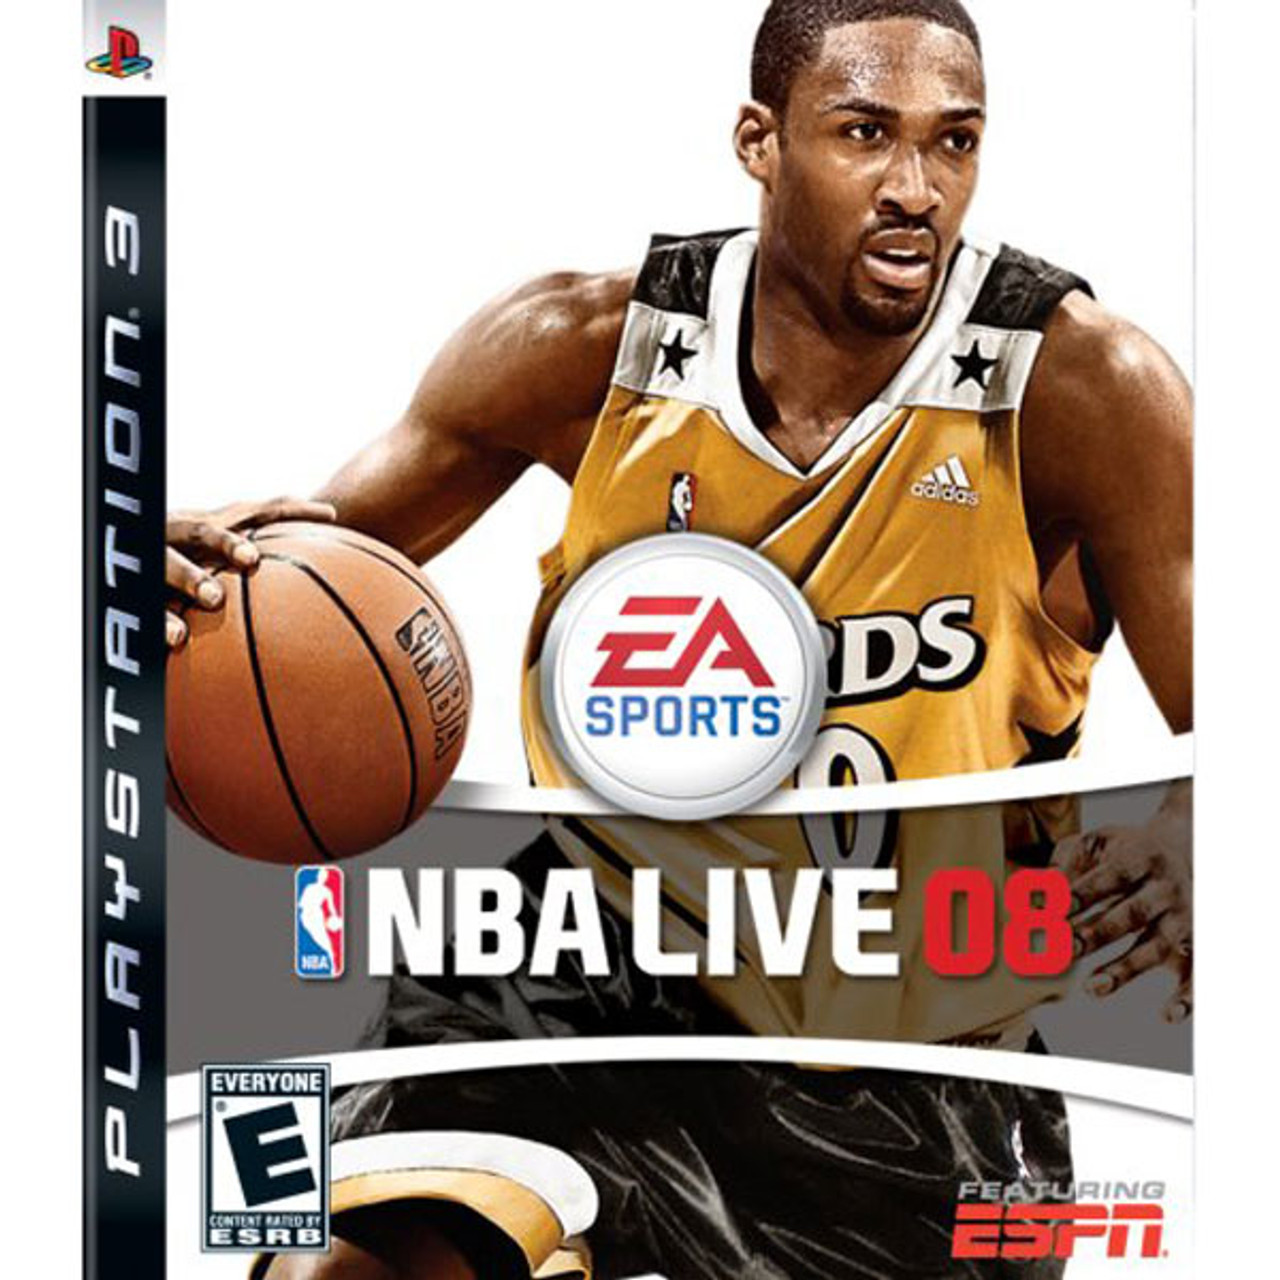 NBA Live 08 Playstation 3 PS3 Game For Sale DKOldies